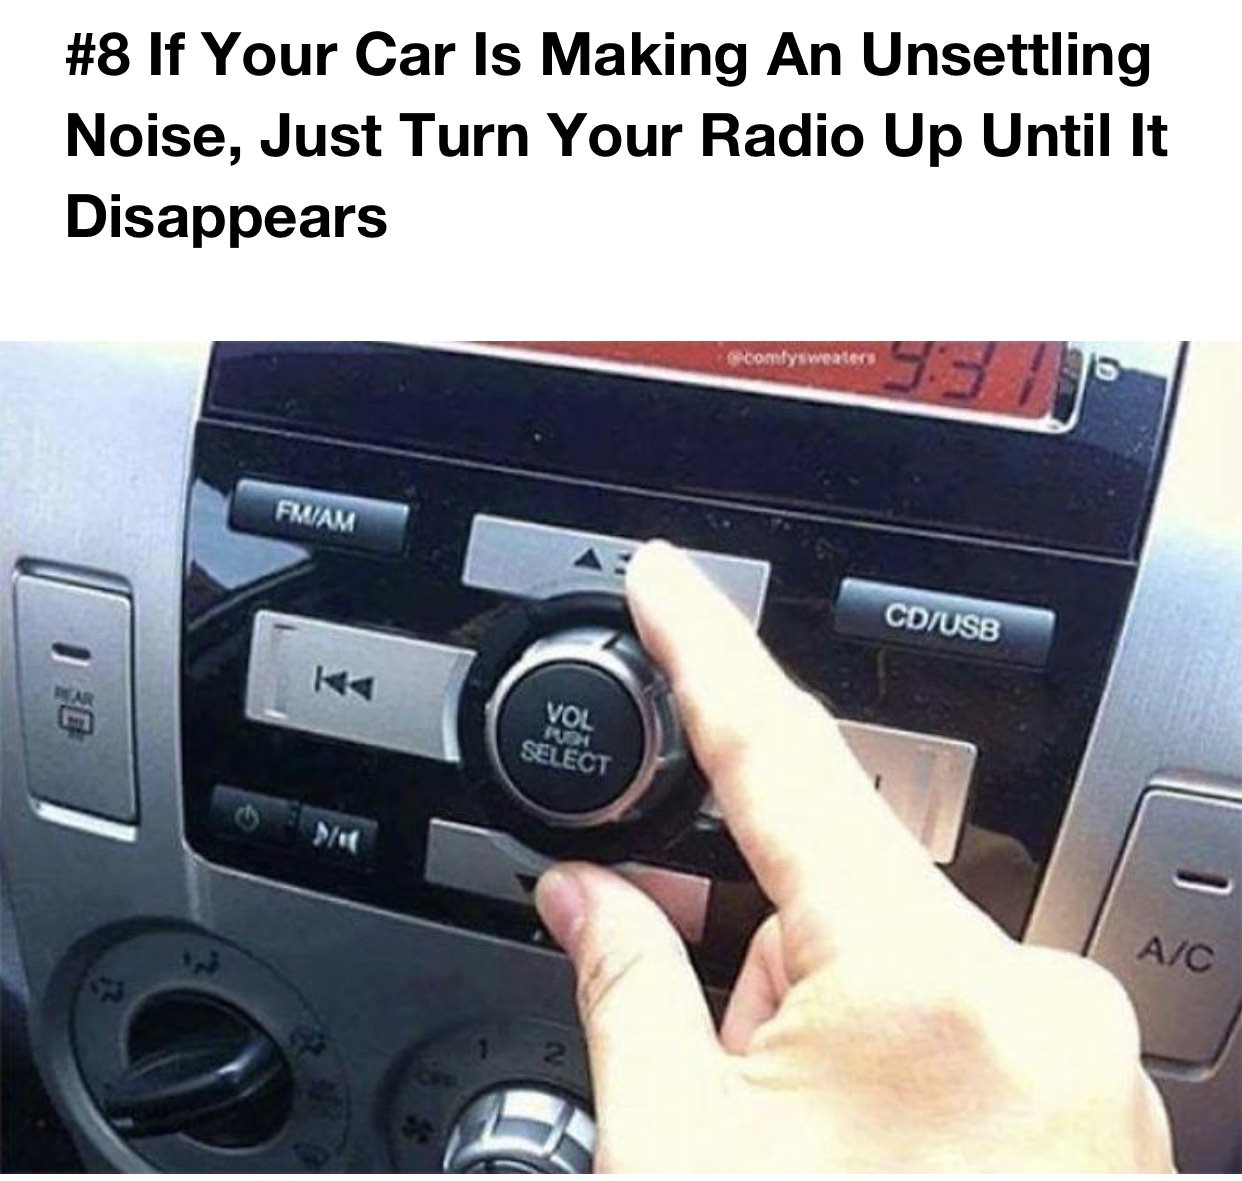 turn on radio - If Your Car Is Making An Unsettling Noise, Just Turn Your Radio Up Until It Disappears comtysweater Fmiam CdUsb Vol Select